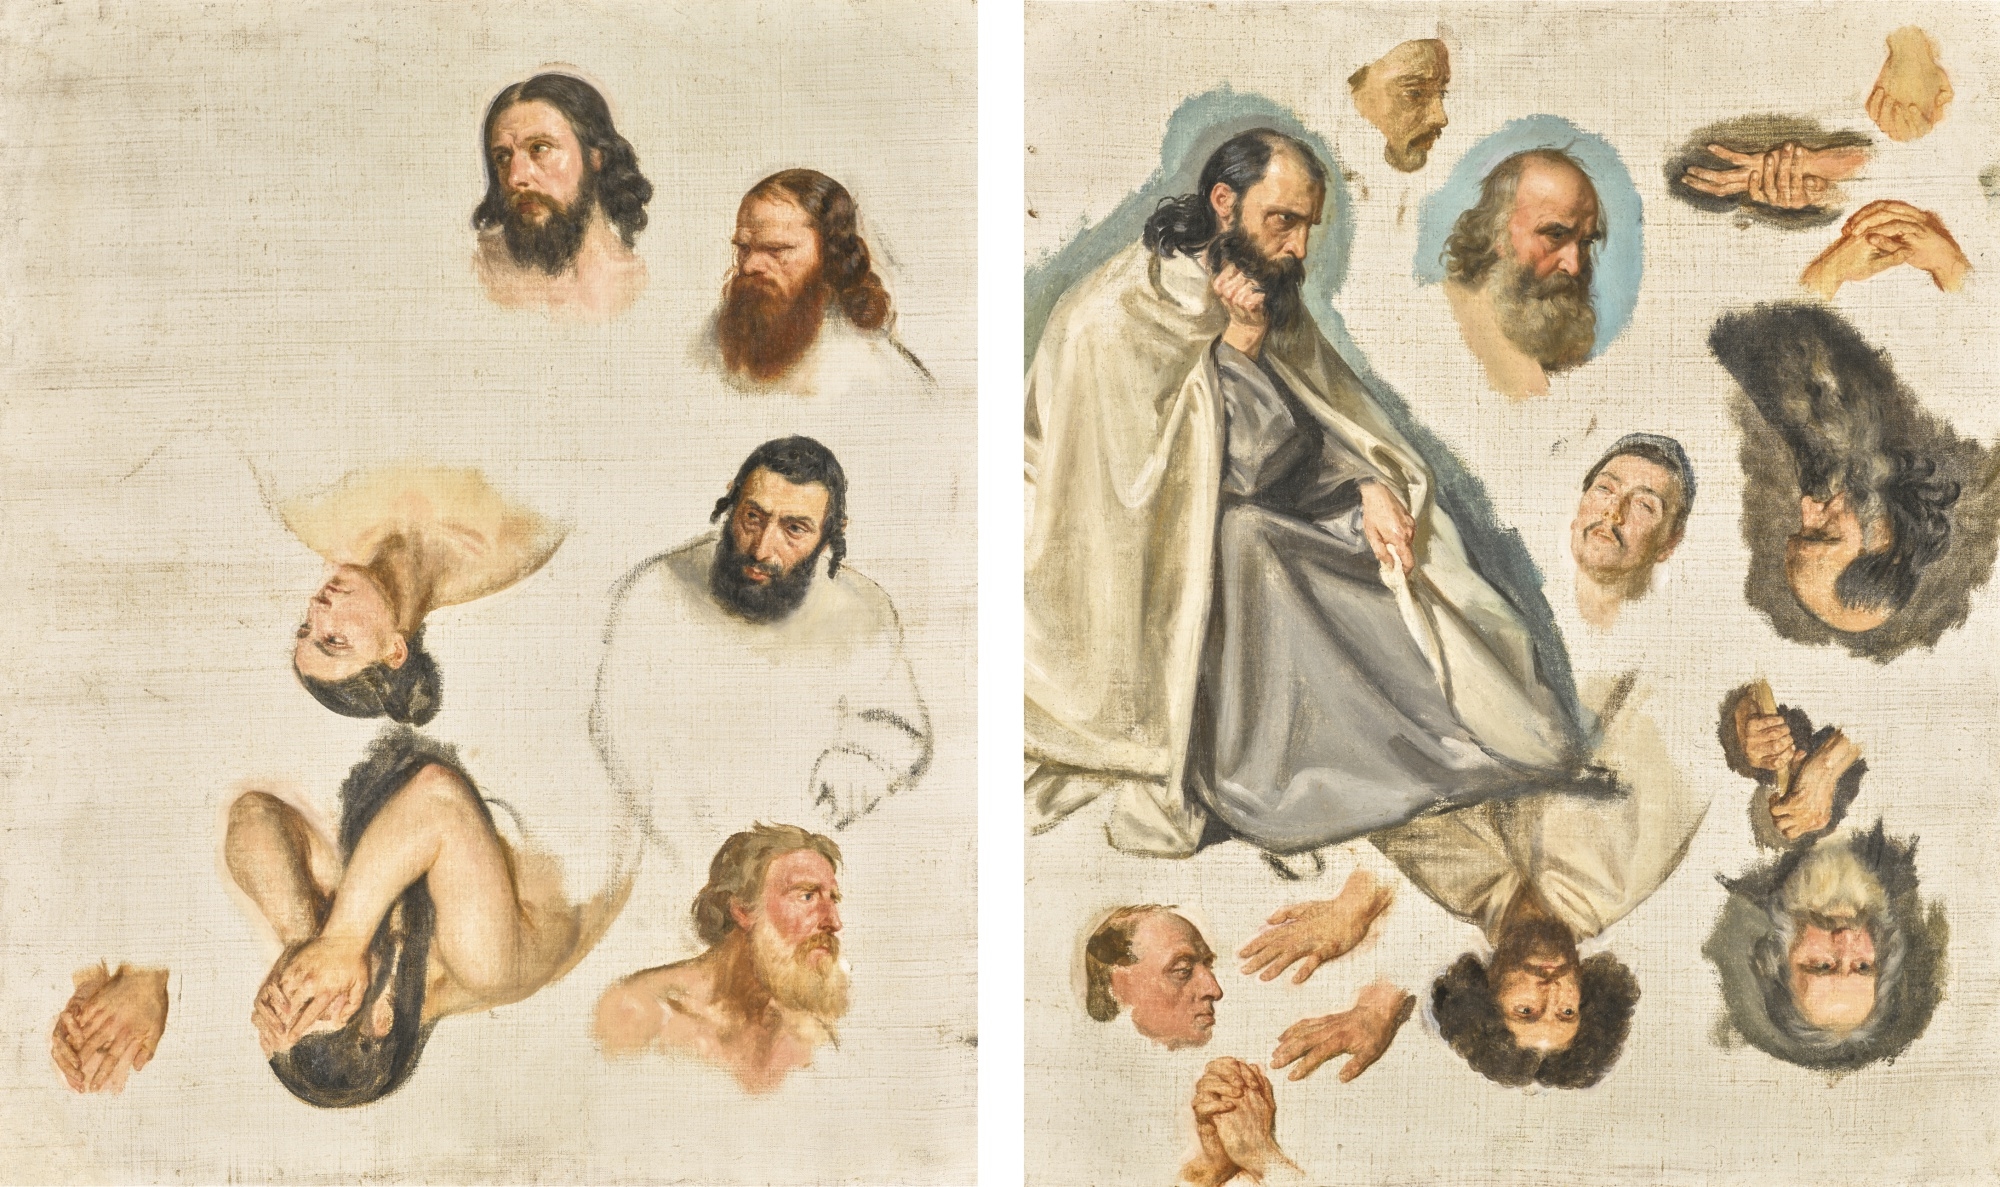 Artwork by Paul Delaroche, 2 WORKS: STUDIES FOR A SEATED MAN, HEADS AND HANDS, Made of Oil on canvas